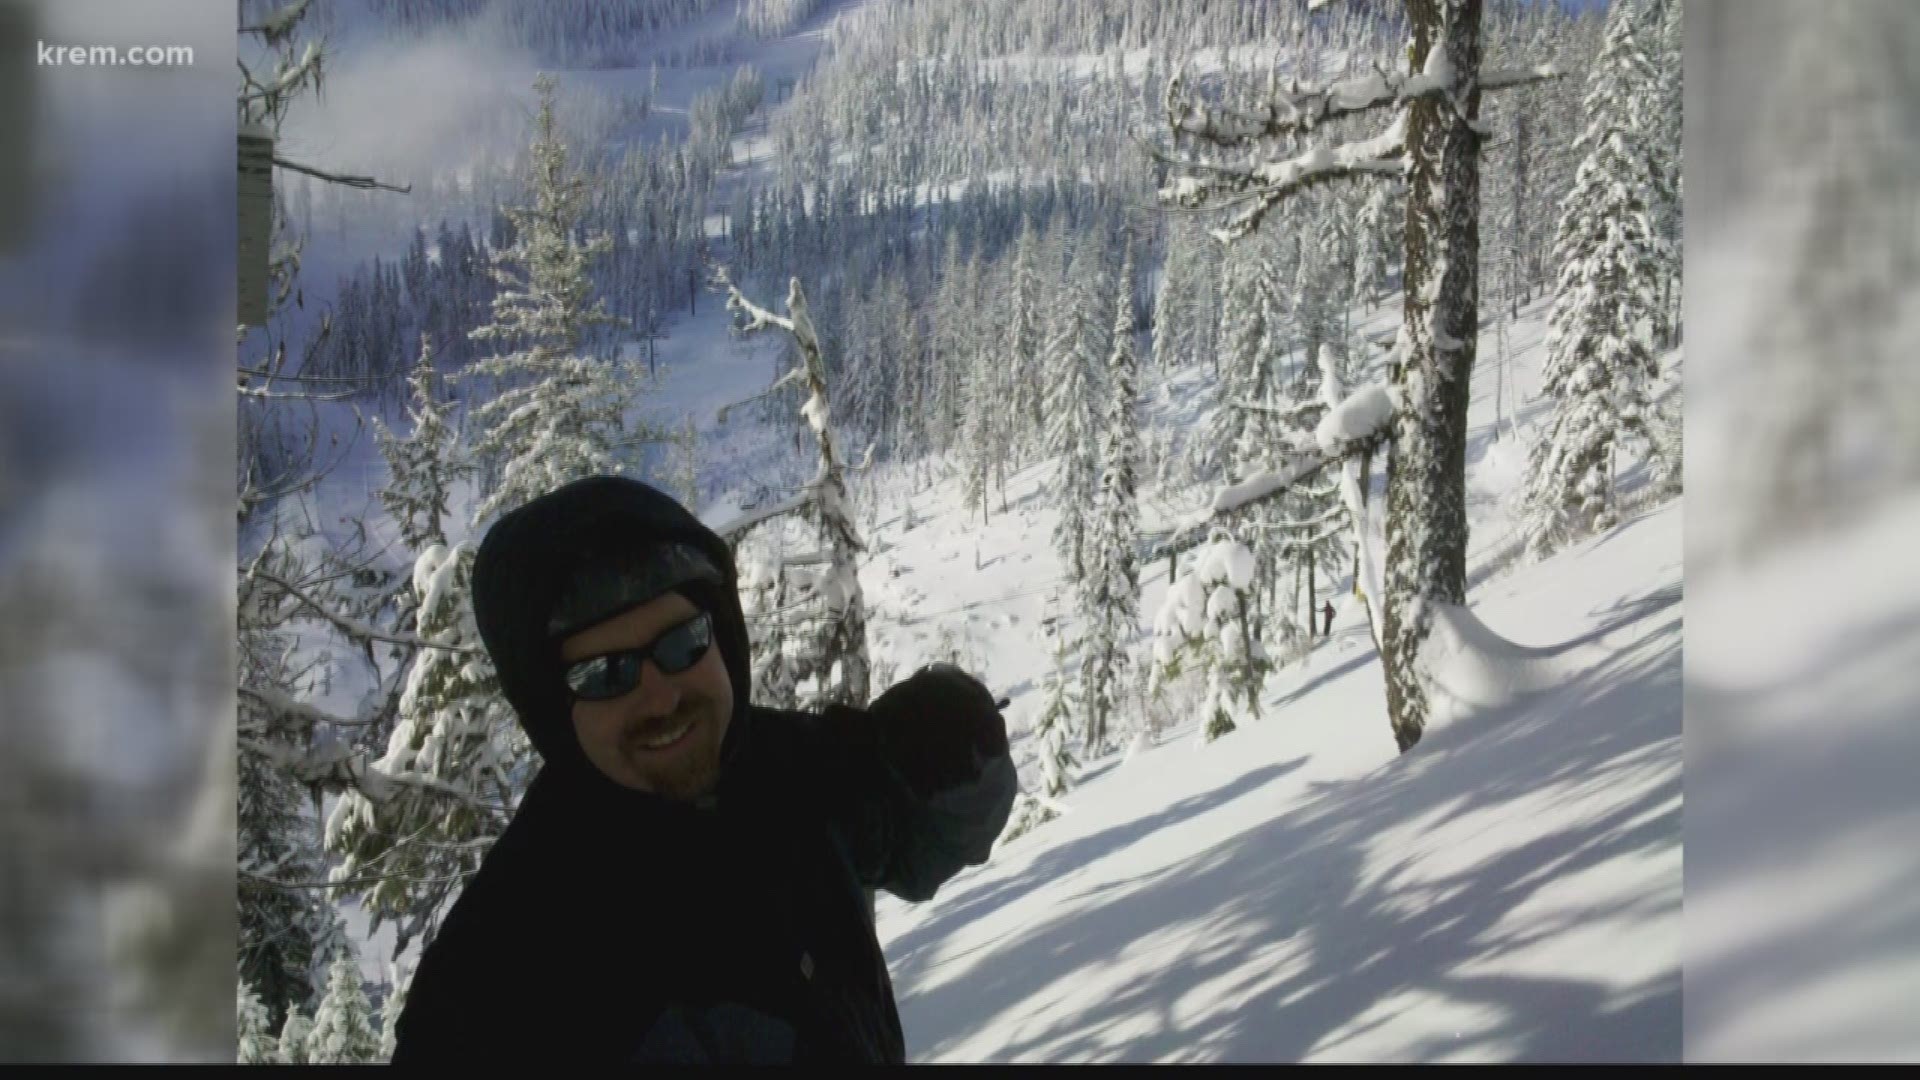 Carl Humphreys was one of three people killed in the avalanche.